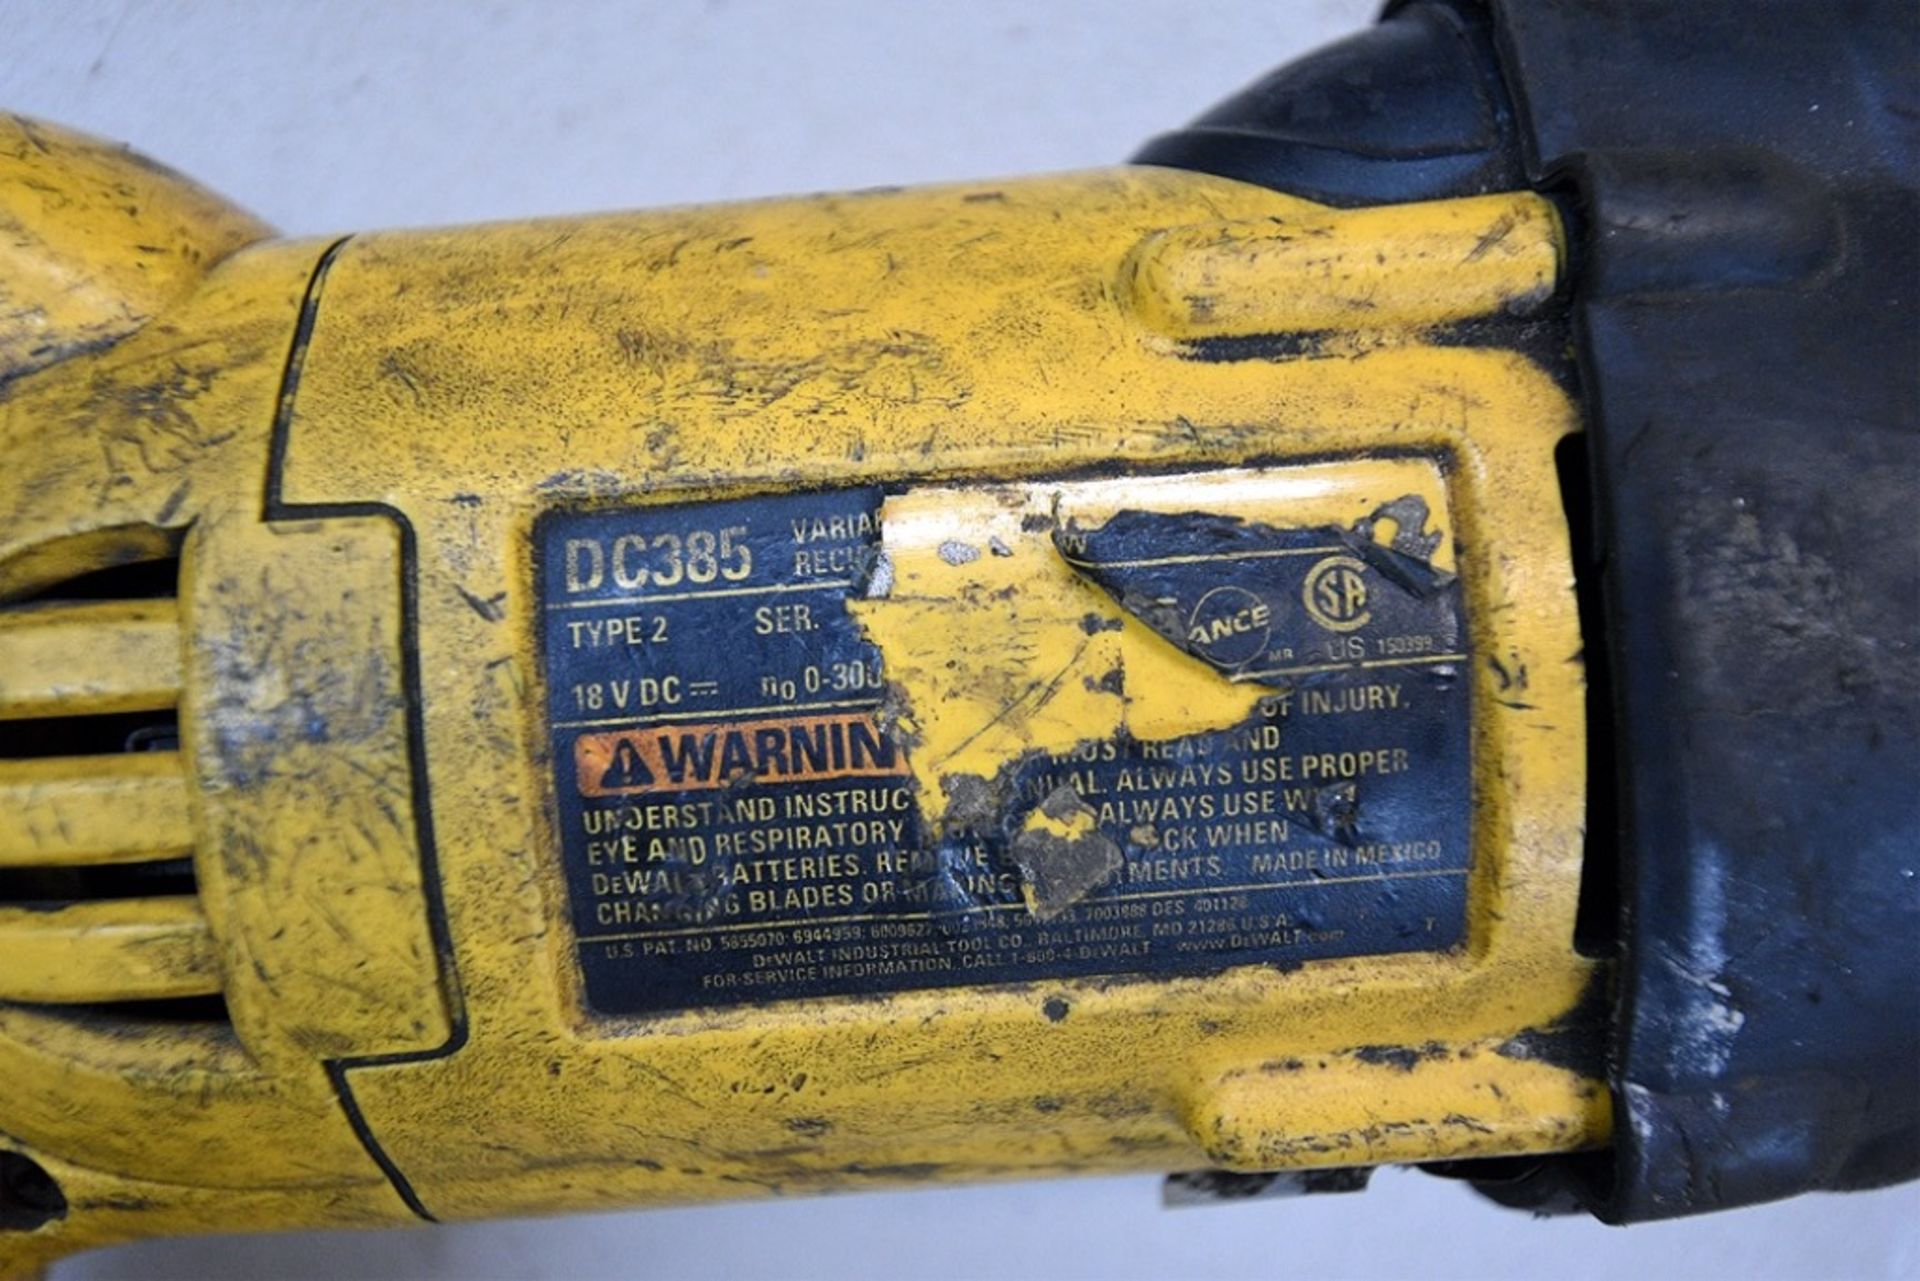 DeWalt DC385 Variable Speed Reciprocating Saws 18v w/ (4) Batteries and (2) Chargers - Image 4 of 5